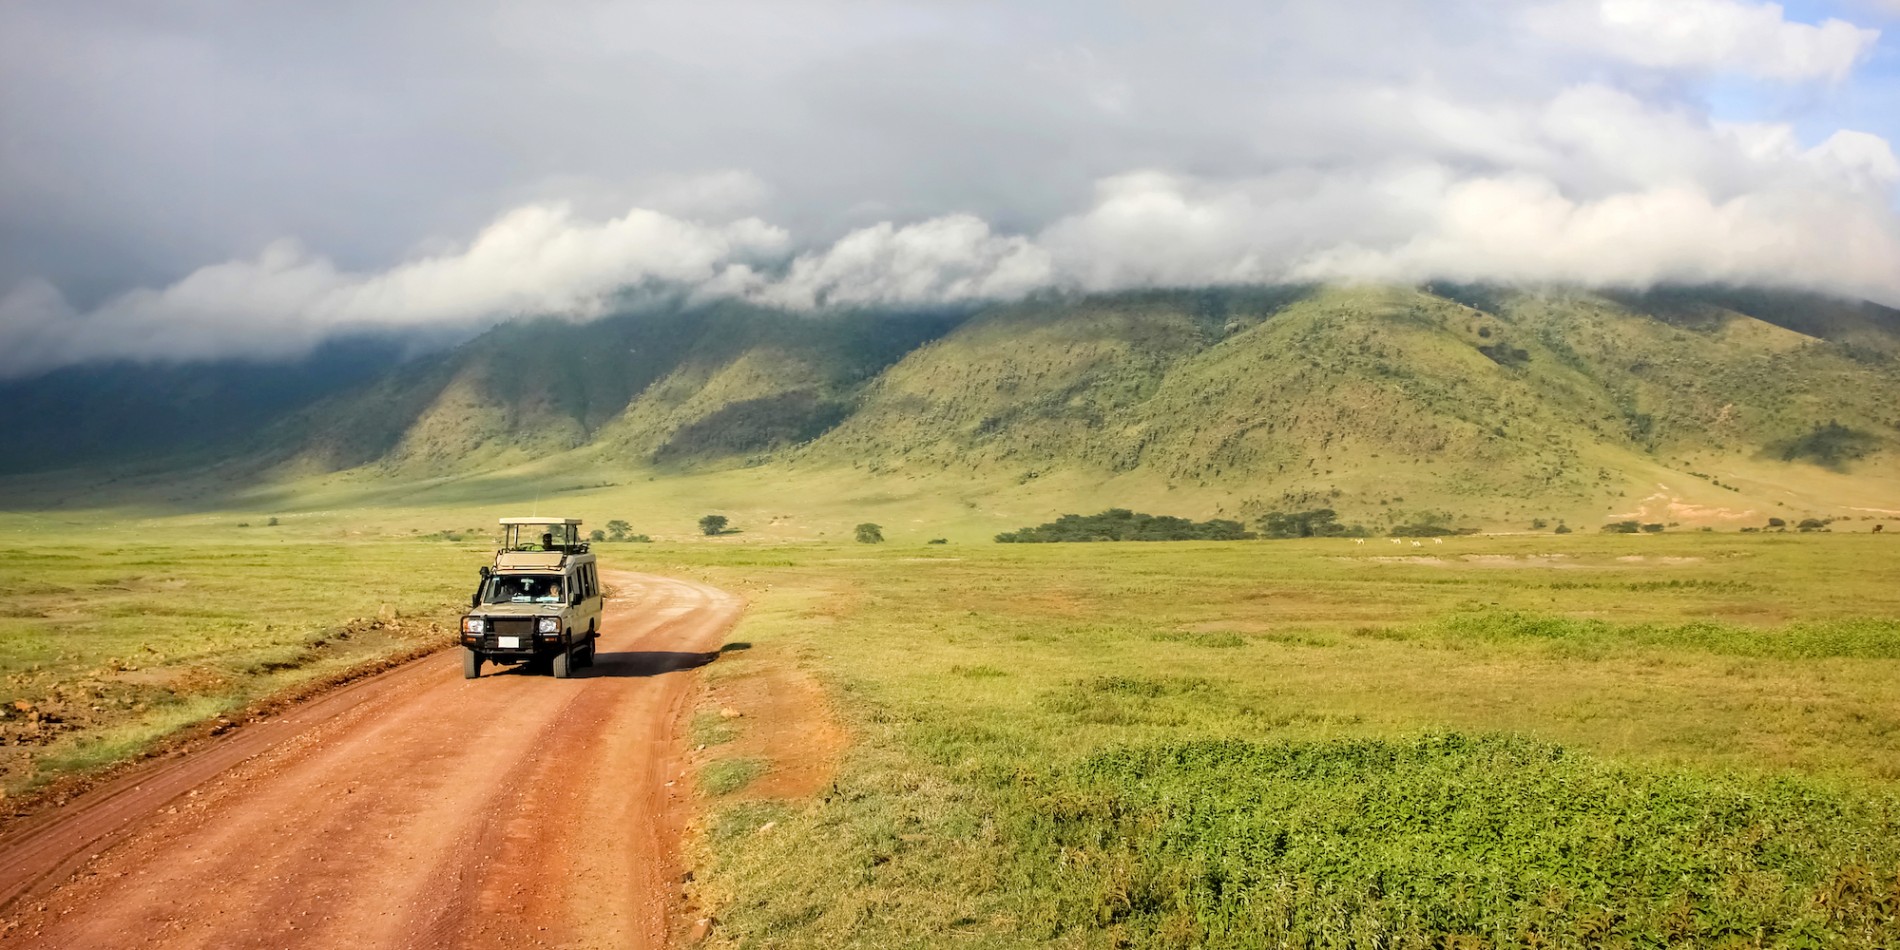 A safari car on a desert dirt road driving towards the camera with green trees and low clouds behind it